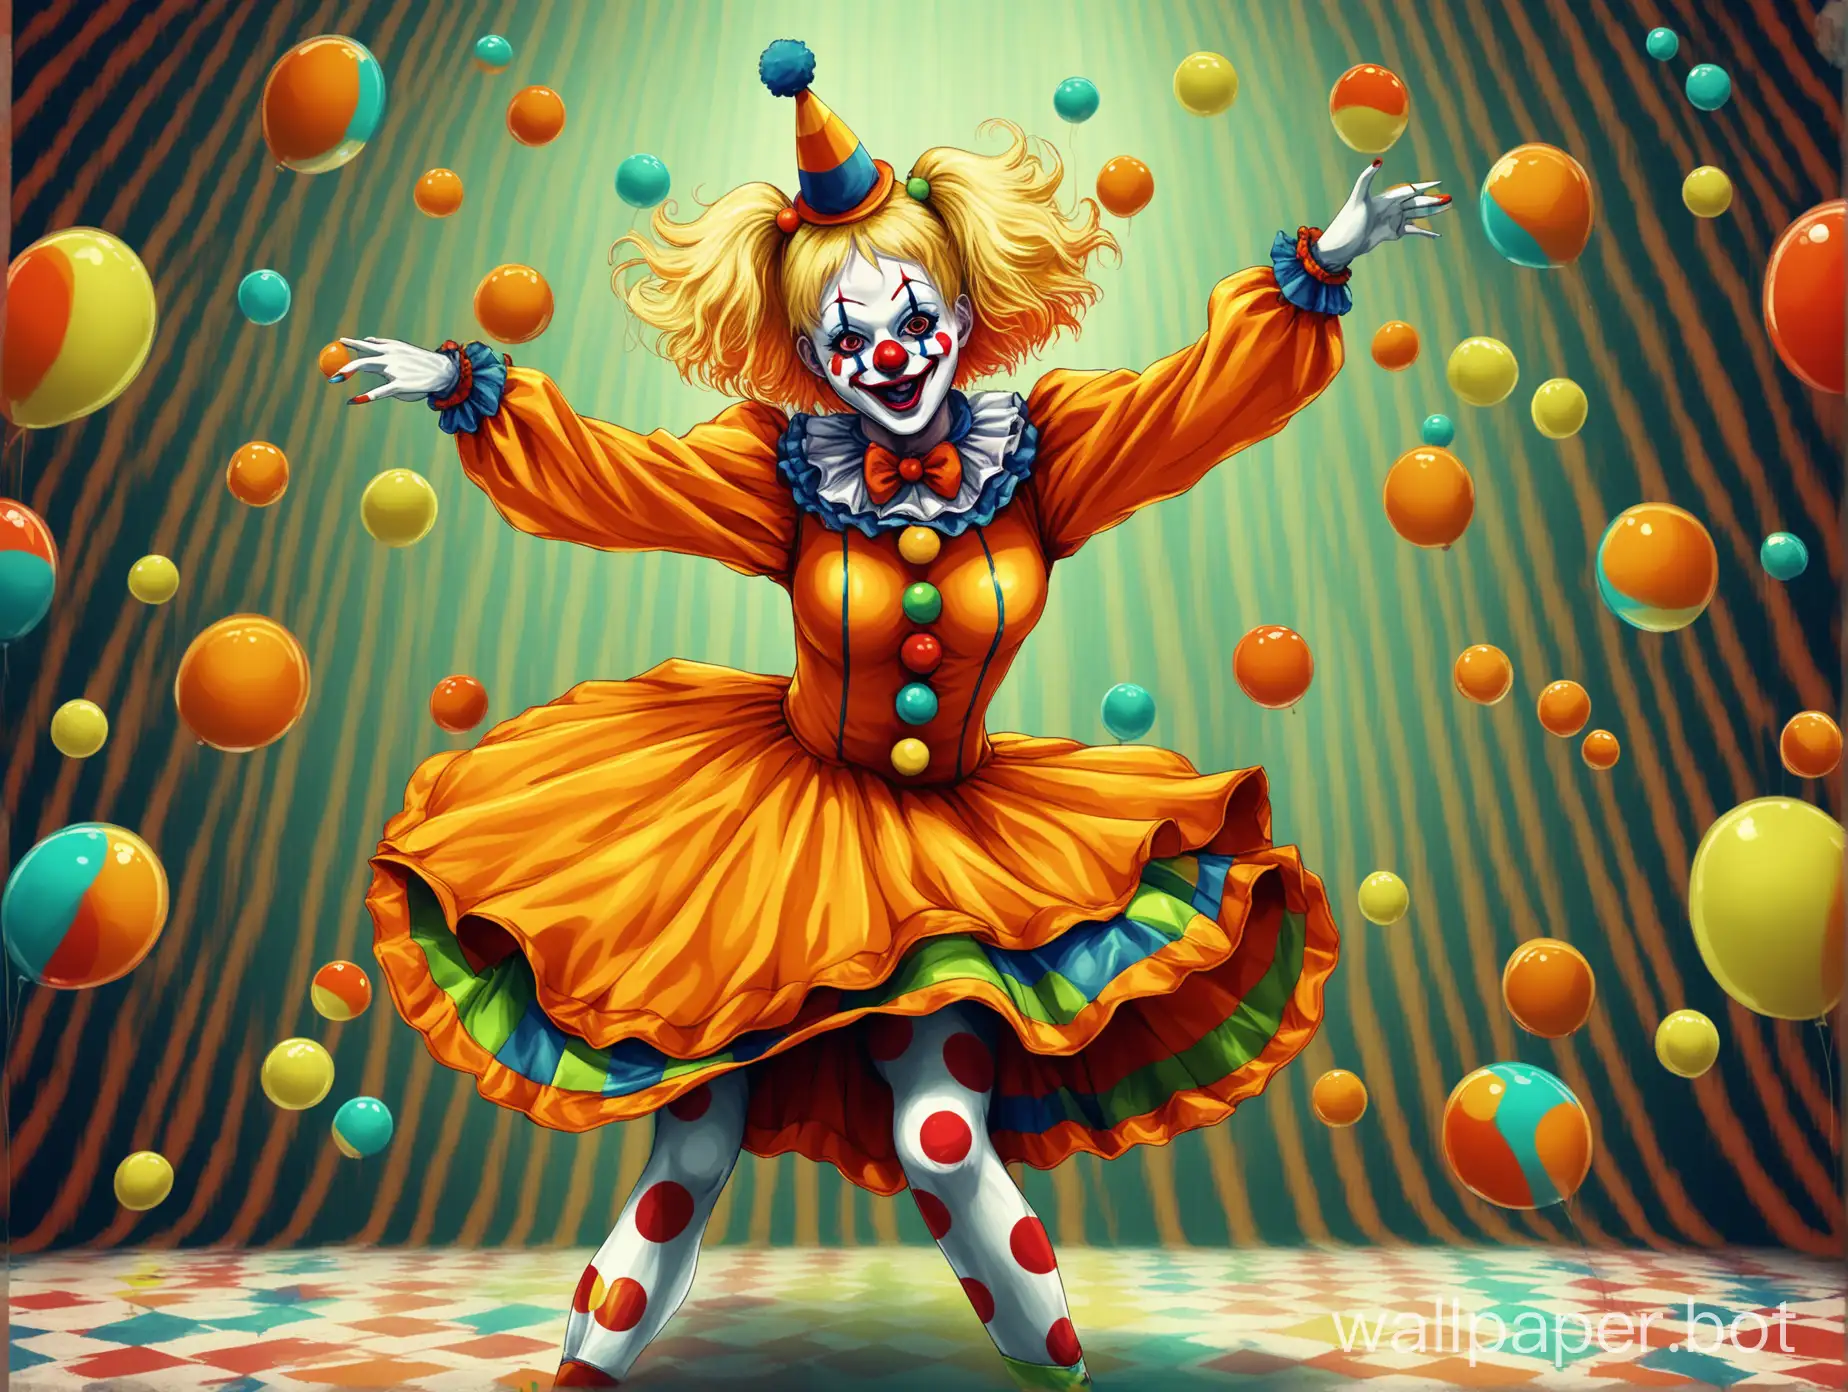 Adorable-Clown-Woman-Dancing-on-Trippy-Acidic-Background